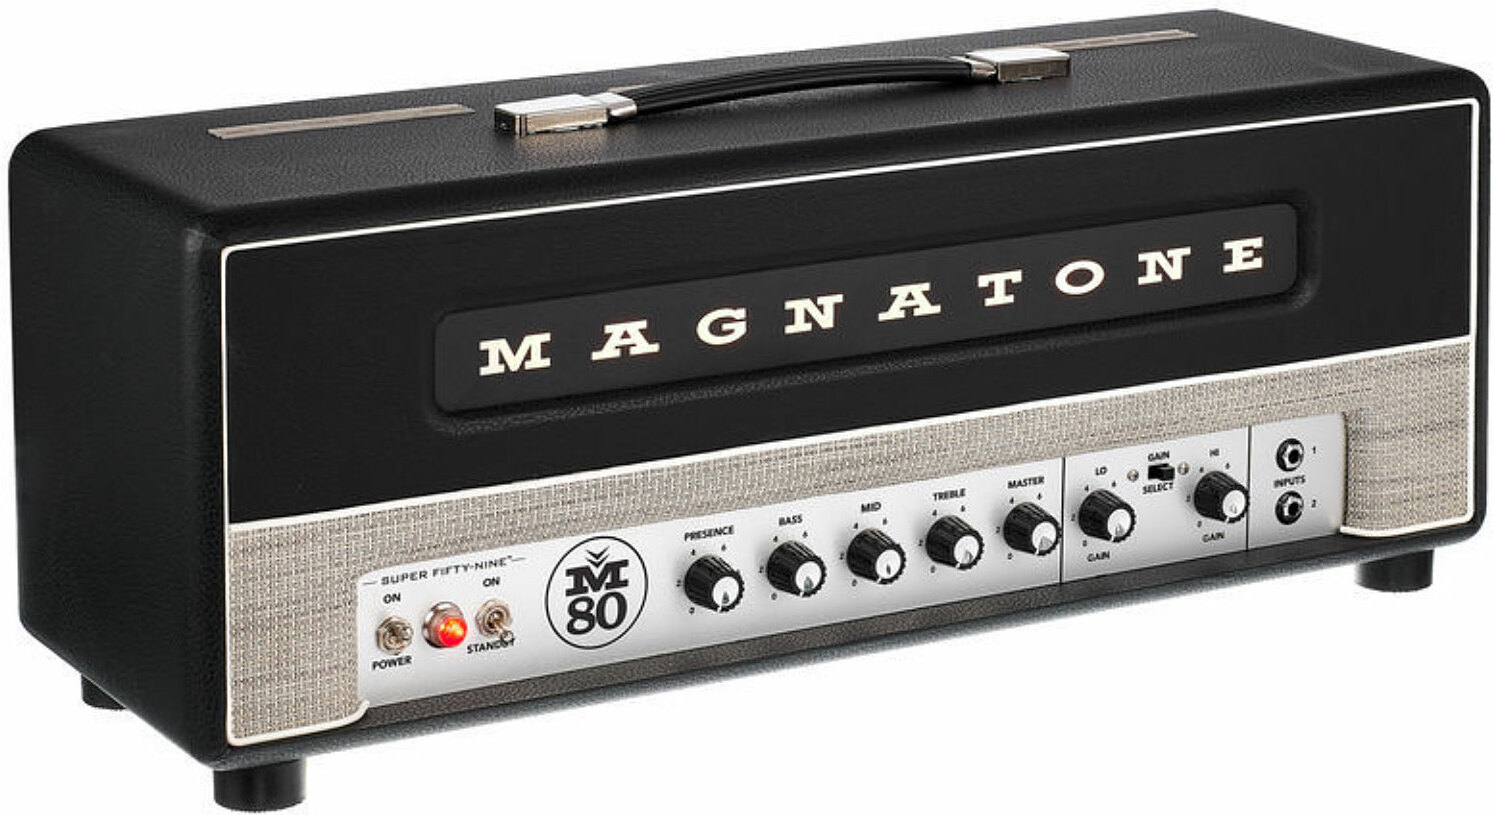 Magnatone Master Collection Super Fifty-nine M-80 Head 45w El34 - Electric guitar amp head - Main picture